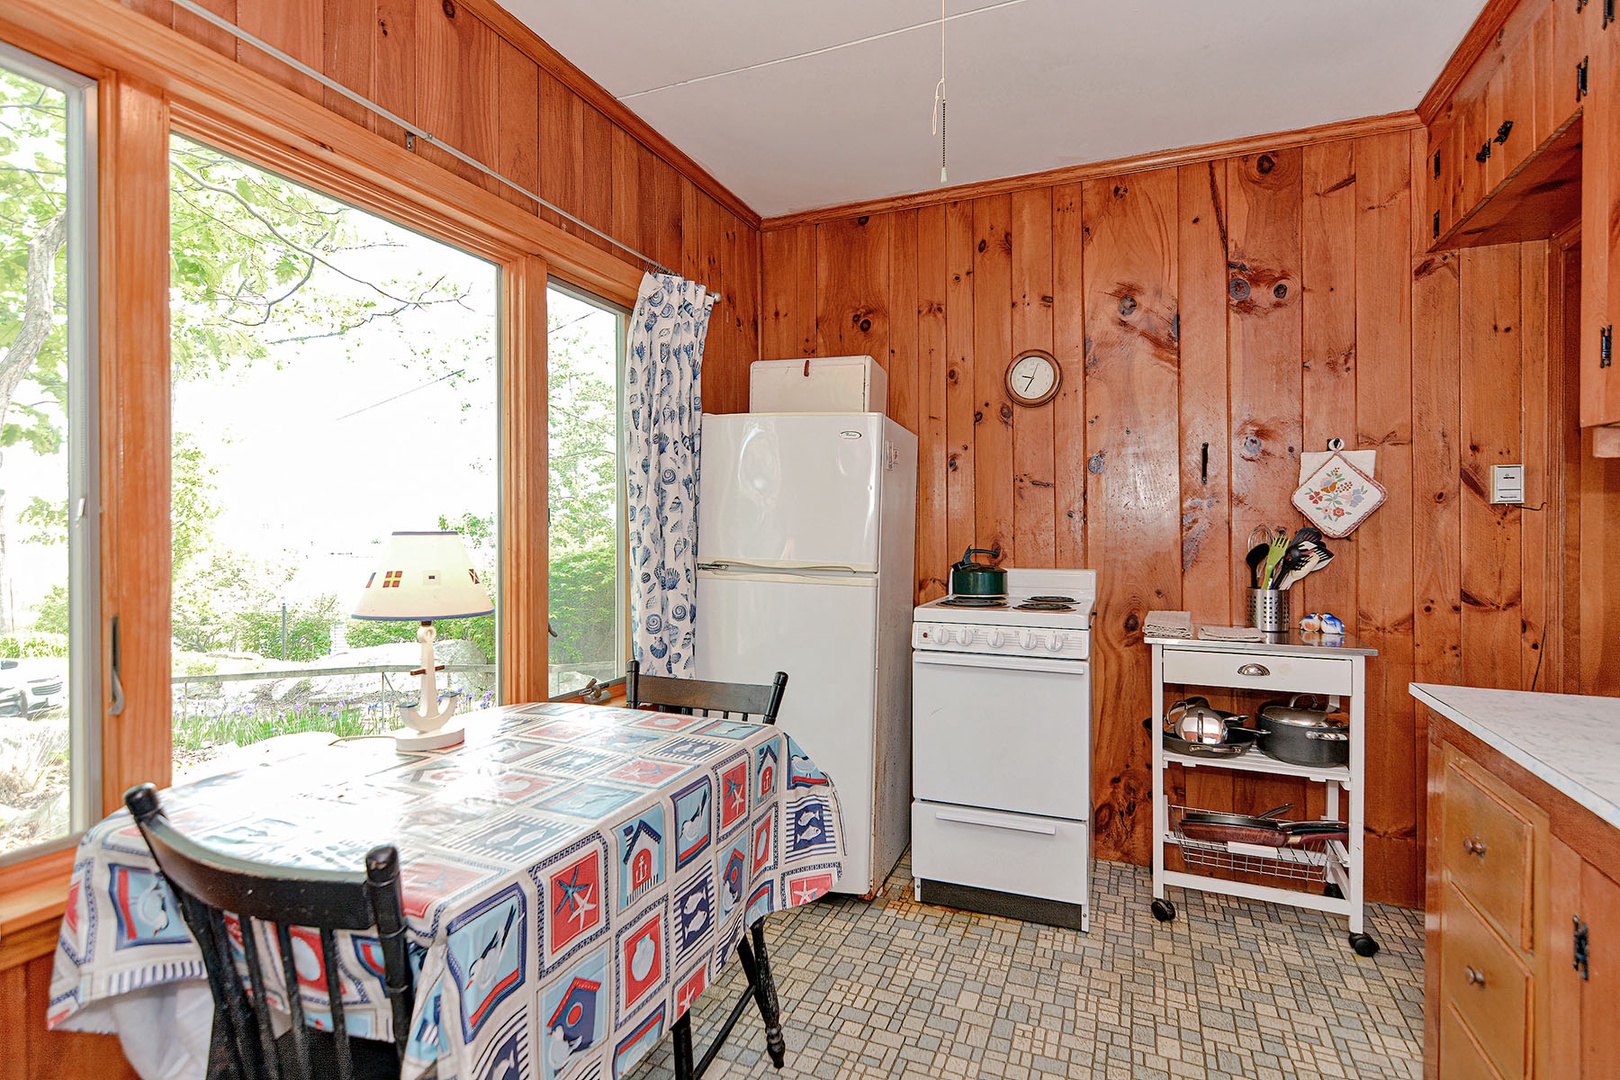 The kitchen is equipped with a refrigerator, stove, and microwave.